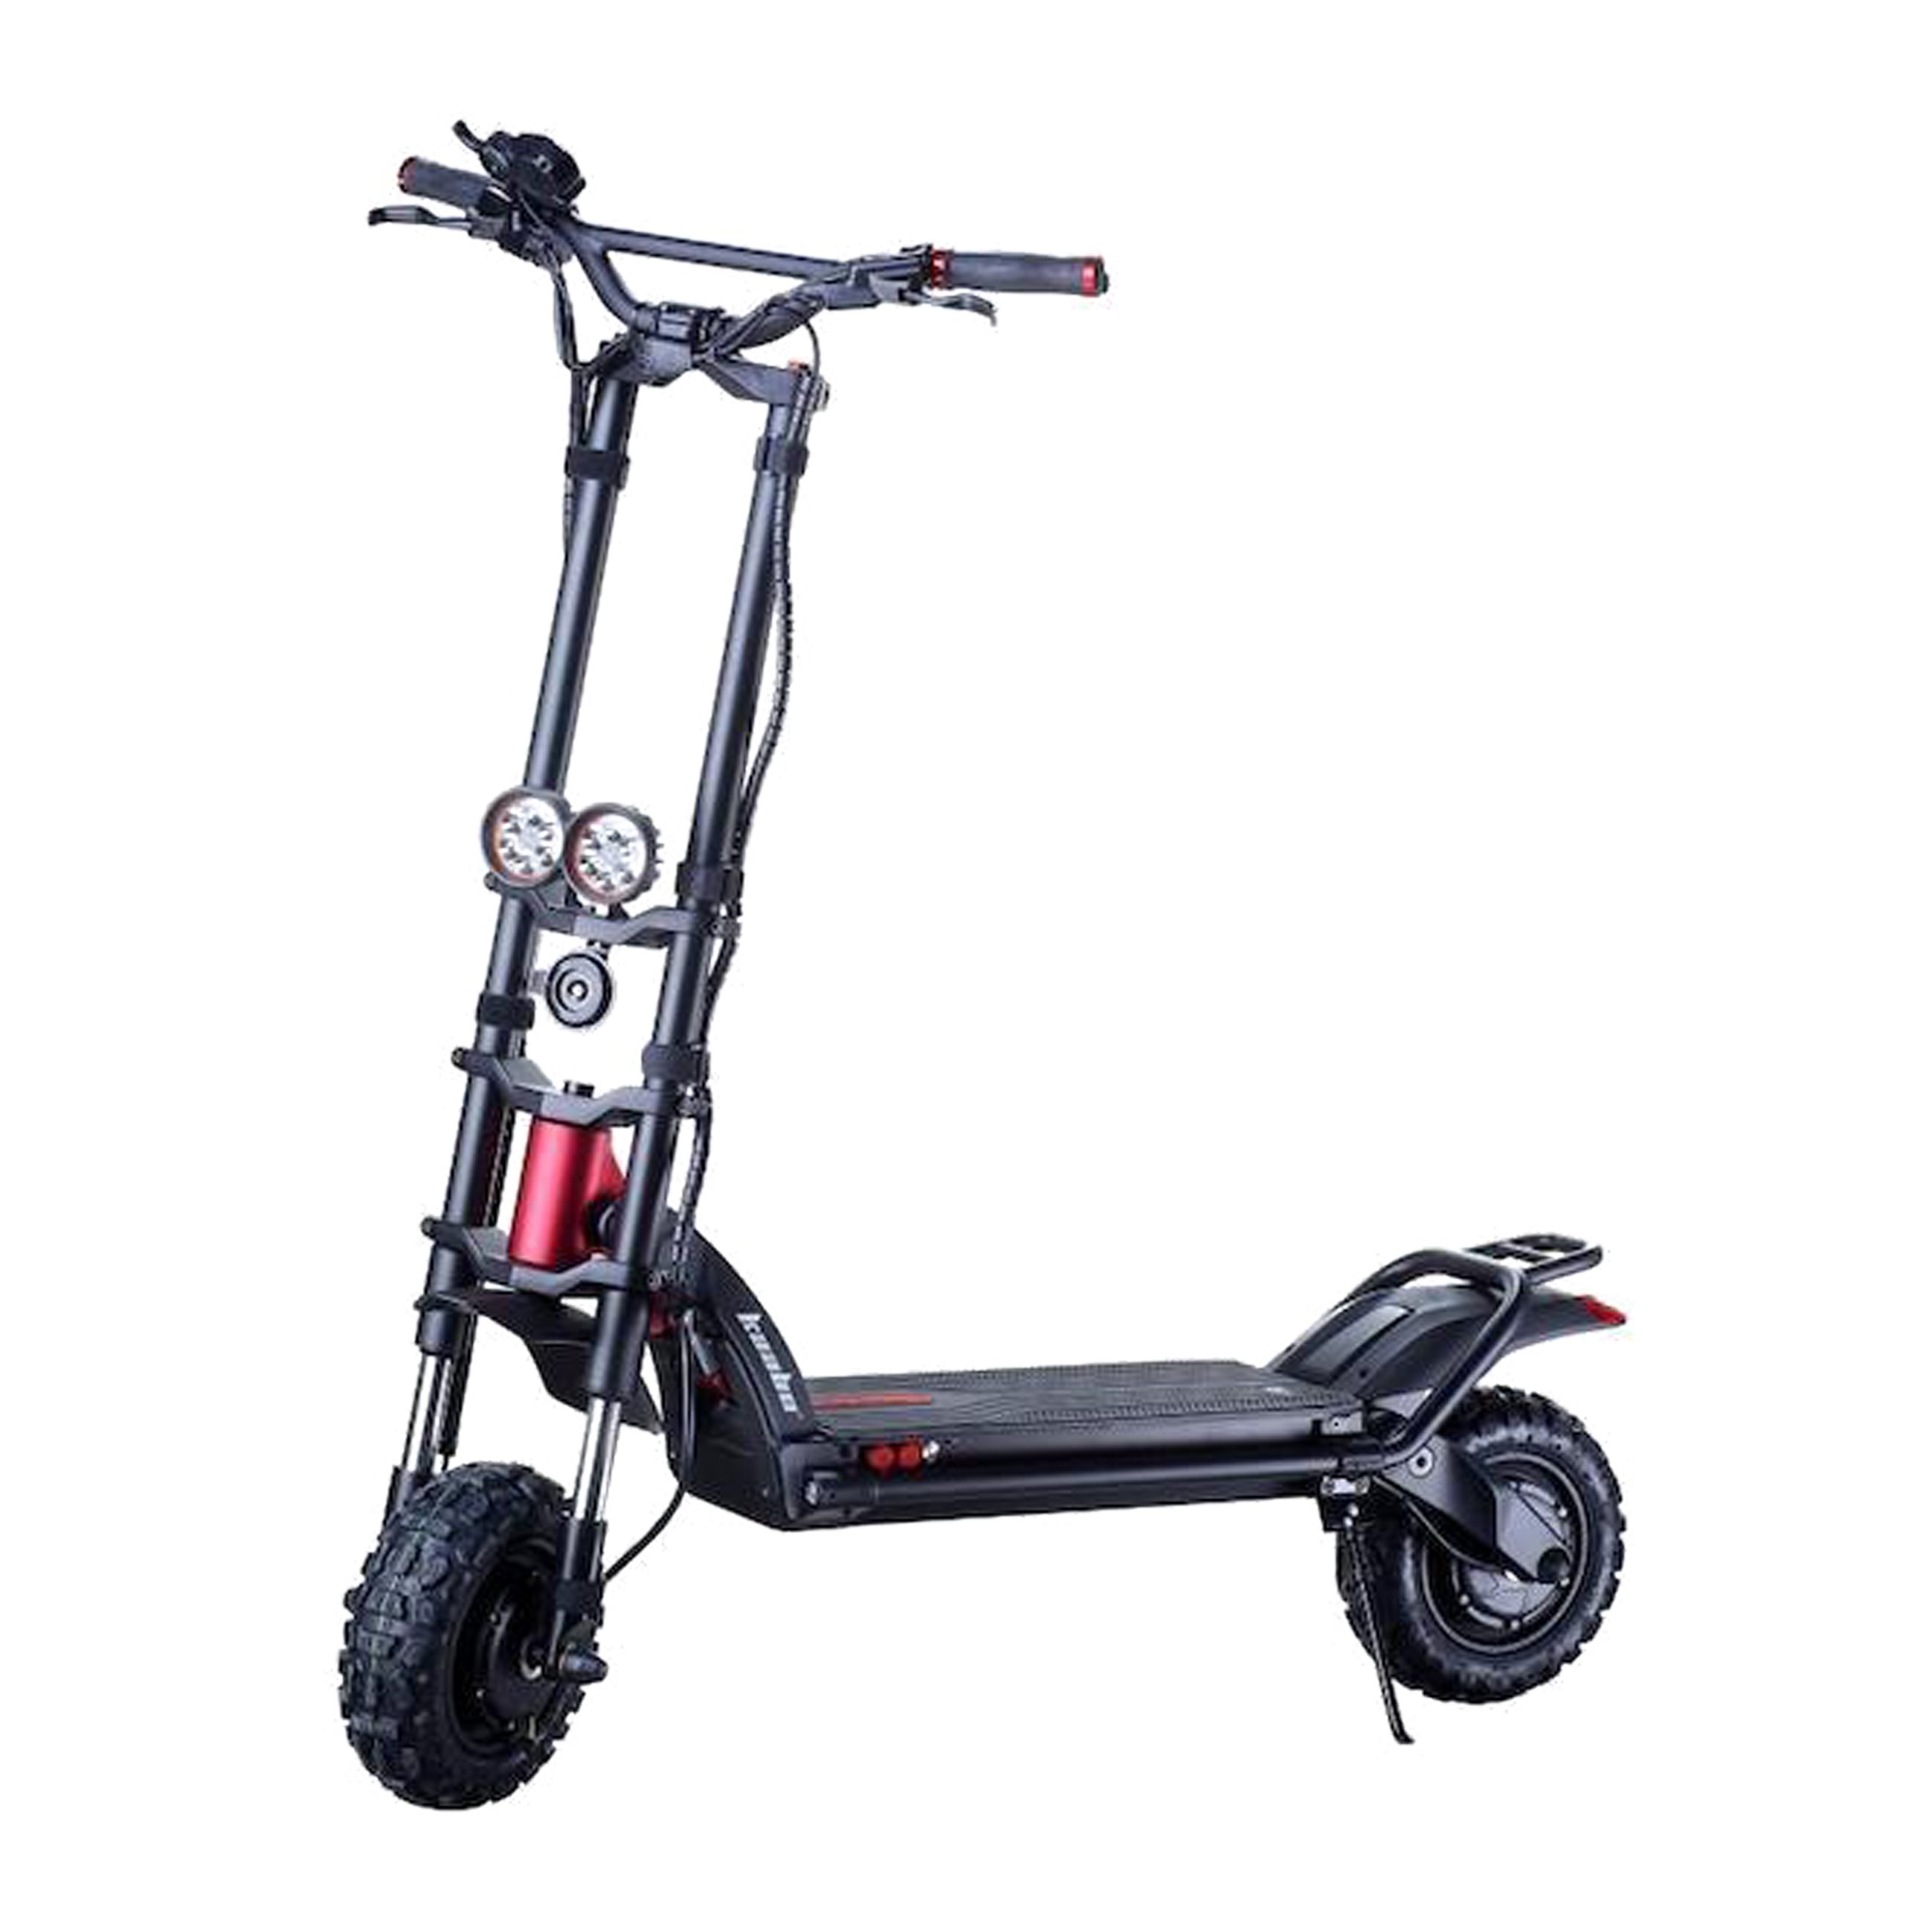 Kaabo Wolf Warrior 11 PRO + (Kaabo Wolf Warrior 2) Electric Scooter – OFF ROAD TYRES